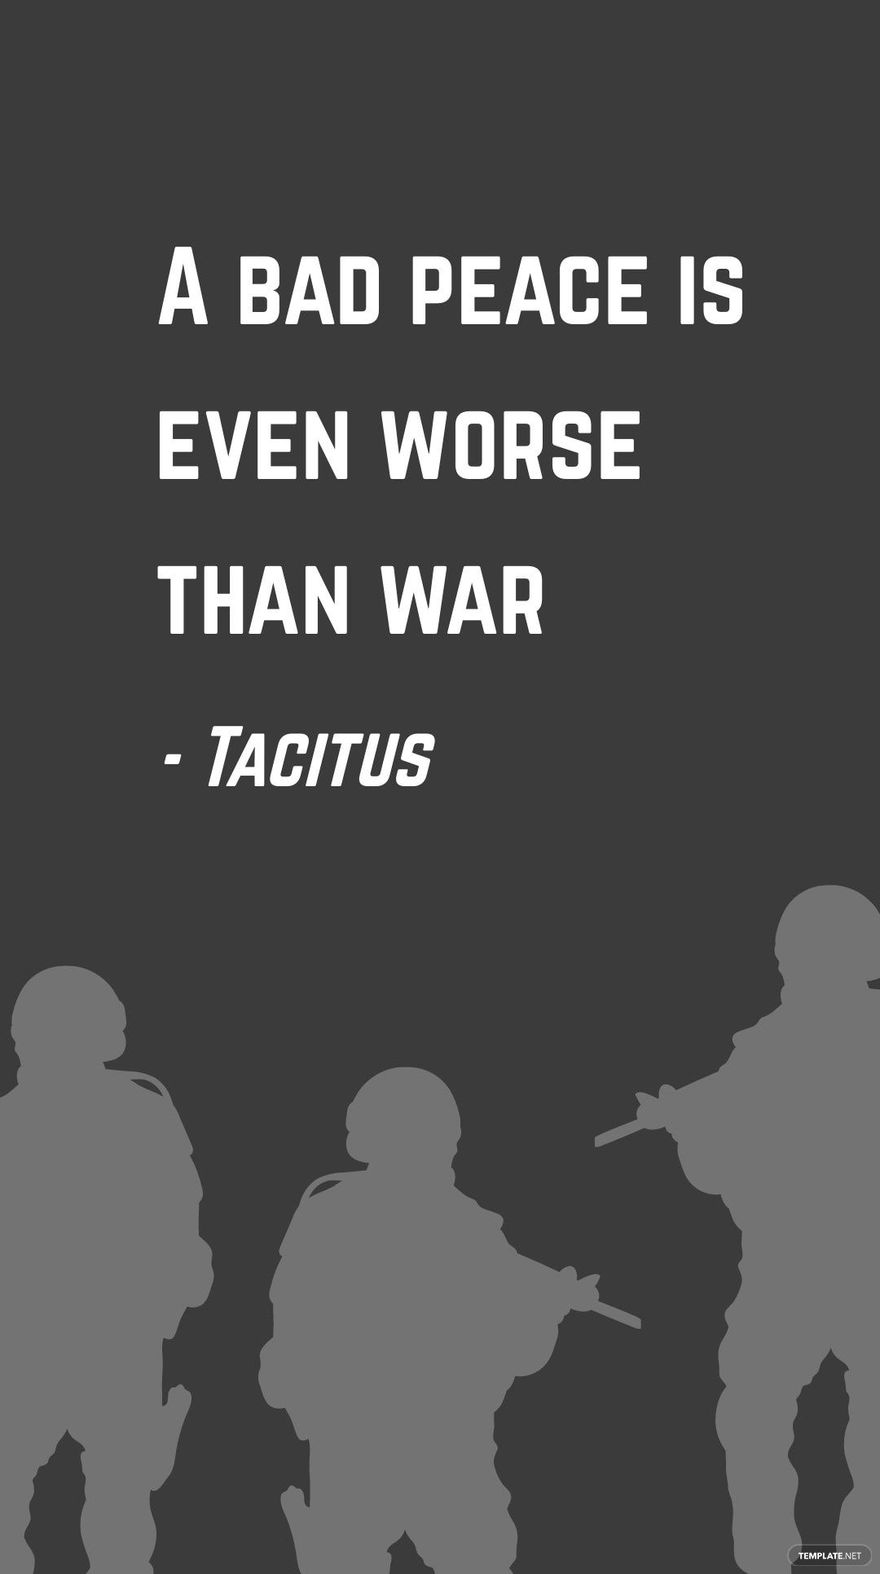 Tacitus - A bad peace is even worse than war in JPG